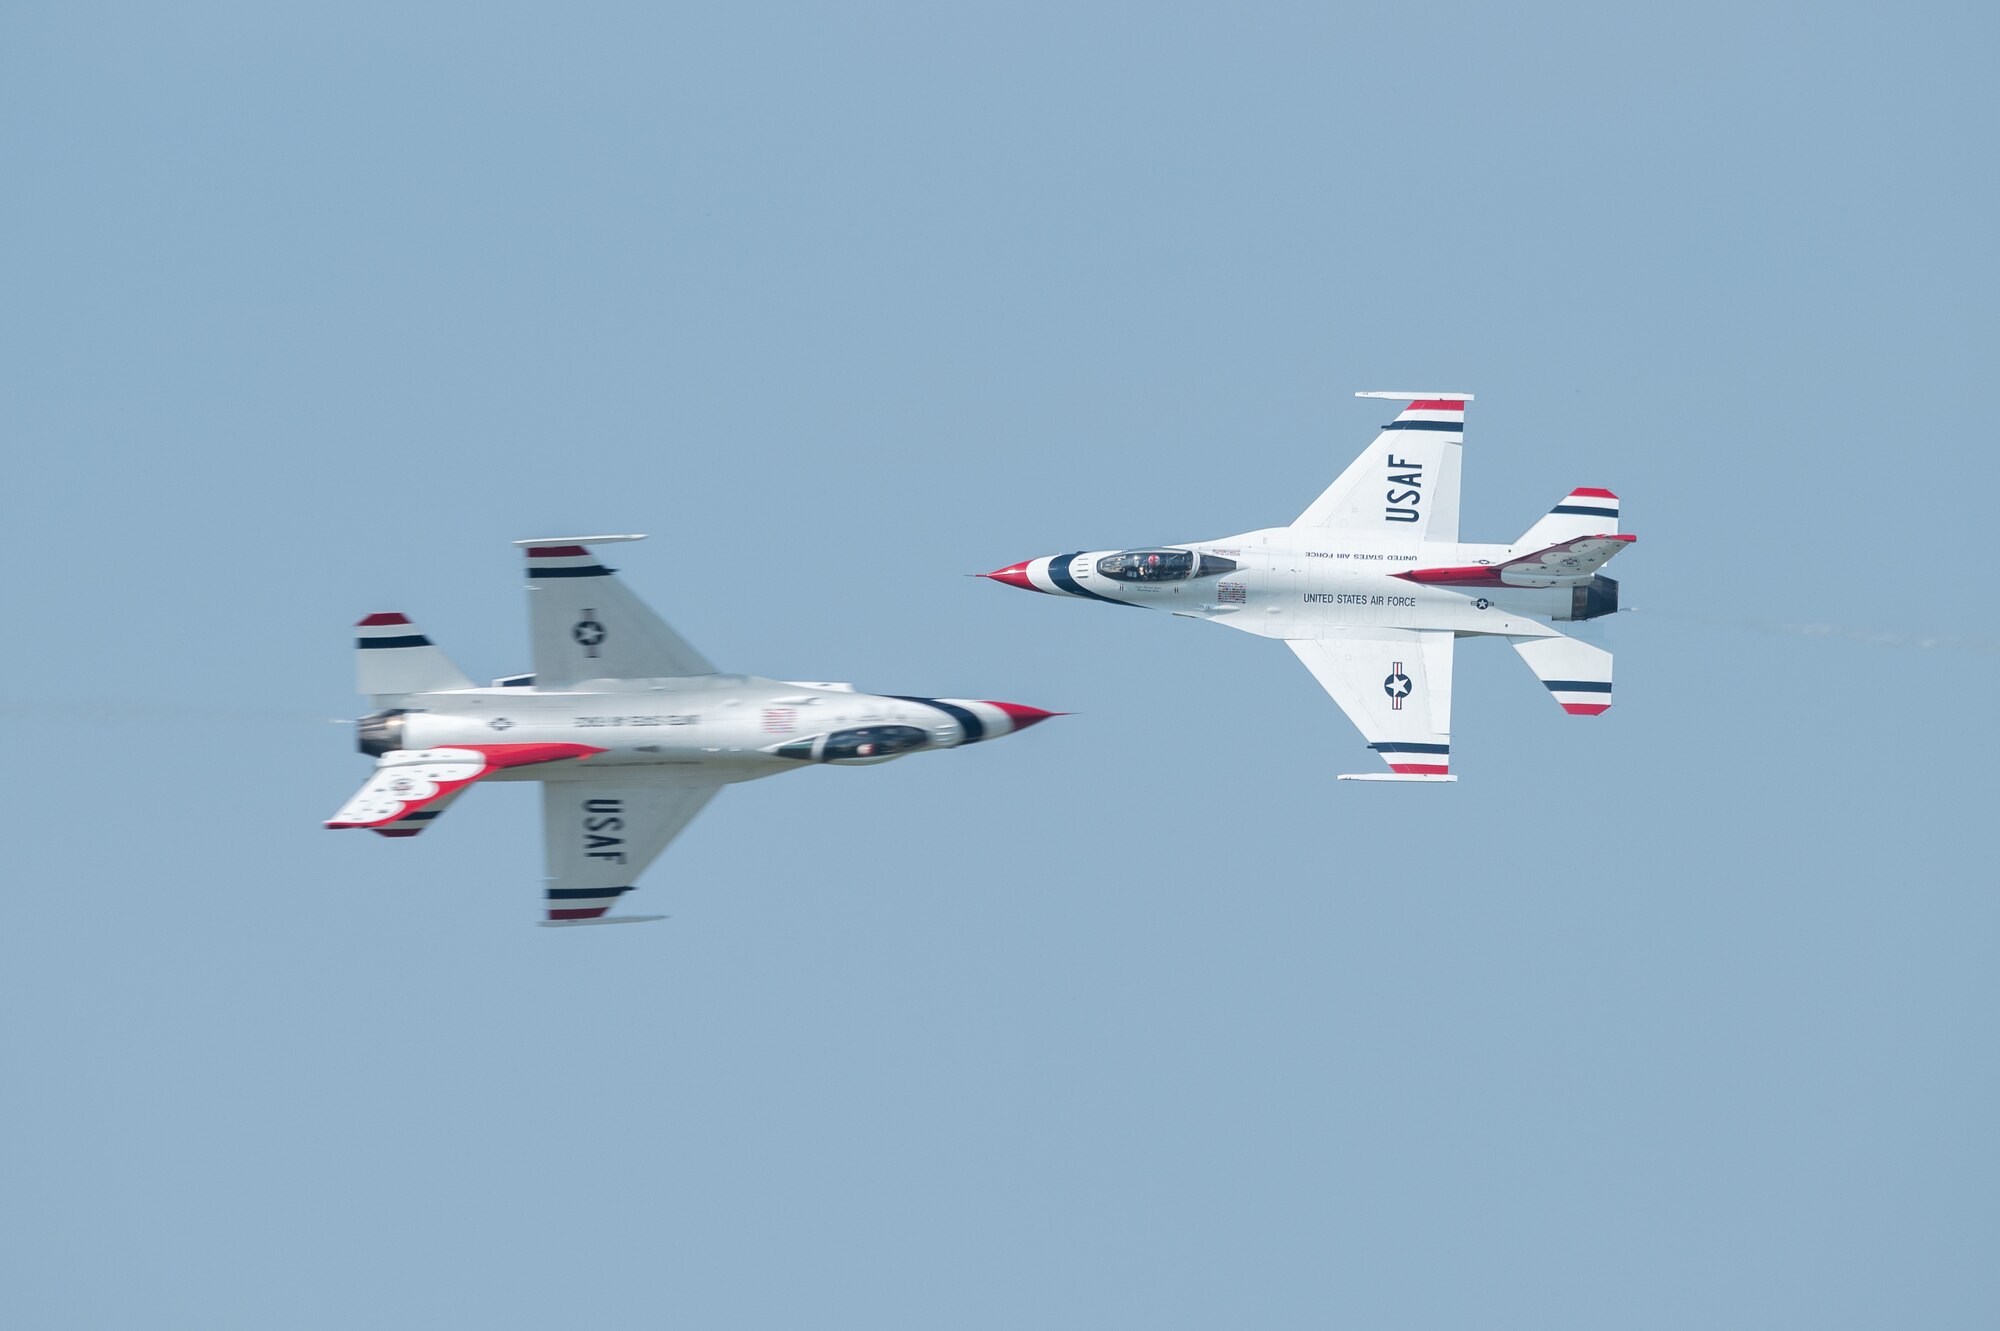 Two members of the U.S. Air Force Thunderbirds perform a high-speed cross over pass during the first day of the 2022 Thunder Over Dover Airshow, May 21, 2022, at Dover Air Force Base, Delaware. The Thunderbirds performed precision flying maneuvers during the 2022 Thunder Over Dover Open House and Airshow May 21-22. (U.S. Air Force photo by Mauricio Campino)